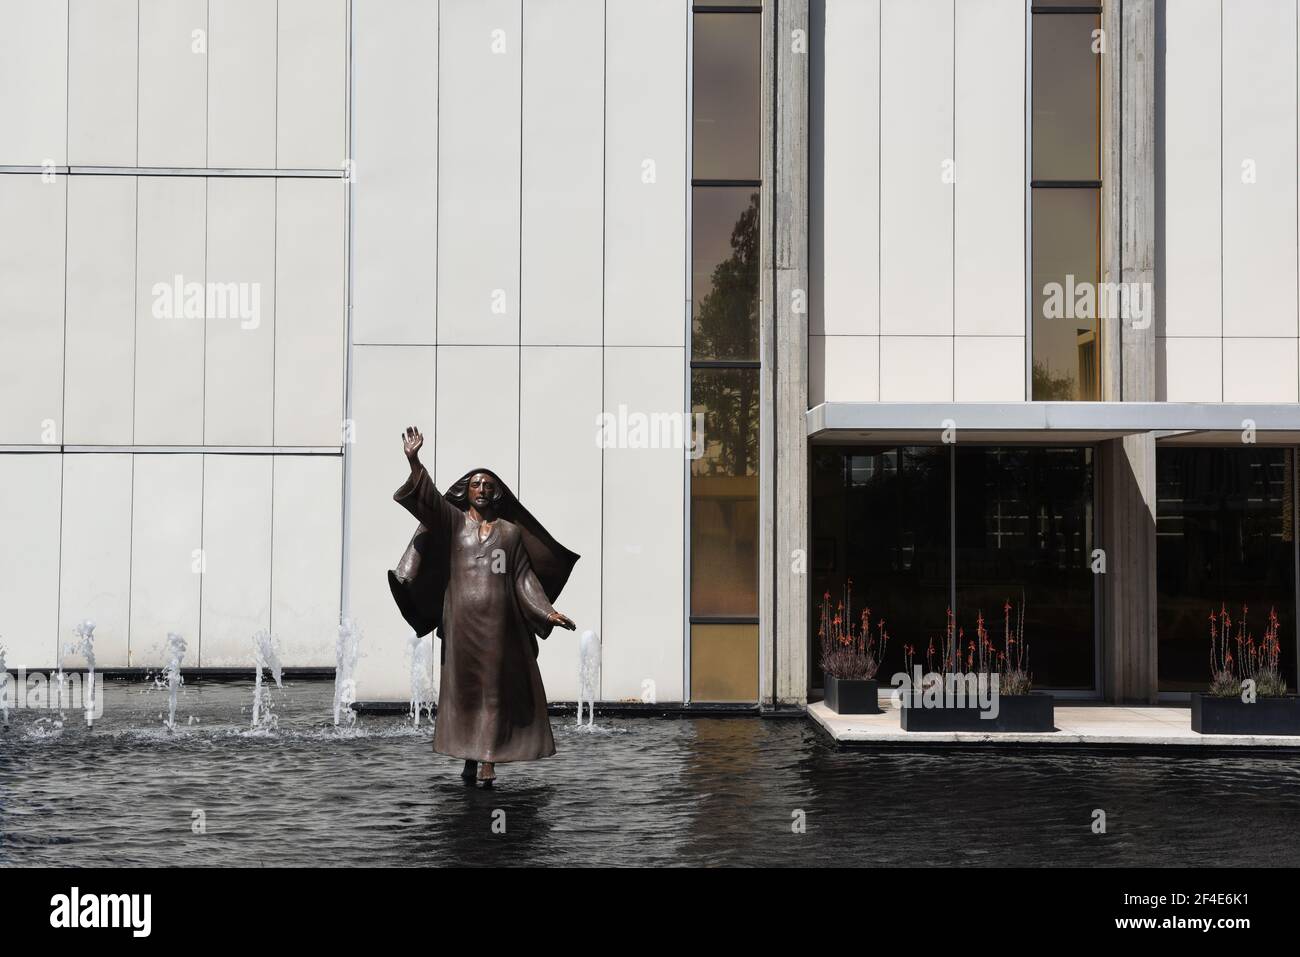 GARDEN GROVE, CALIFORNIA - 20 MAR 2021: Statue of Jesus Walking on Water at the Tower of Hope at the Crystal Cathedral. Stock Photo